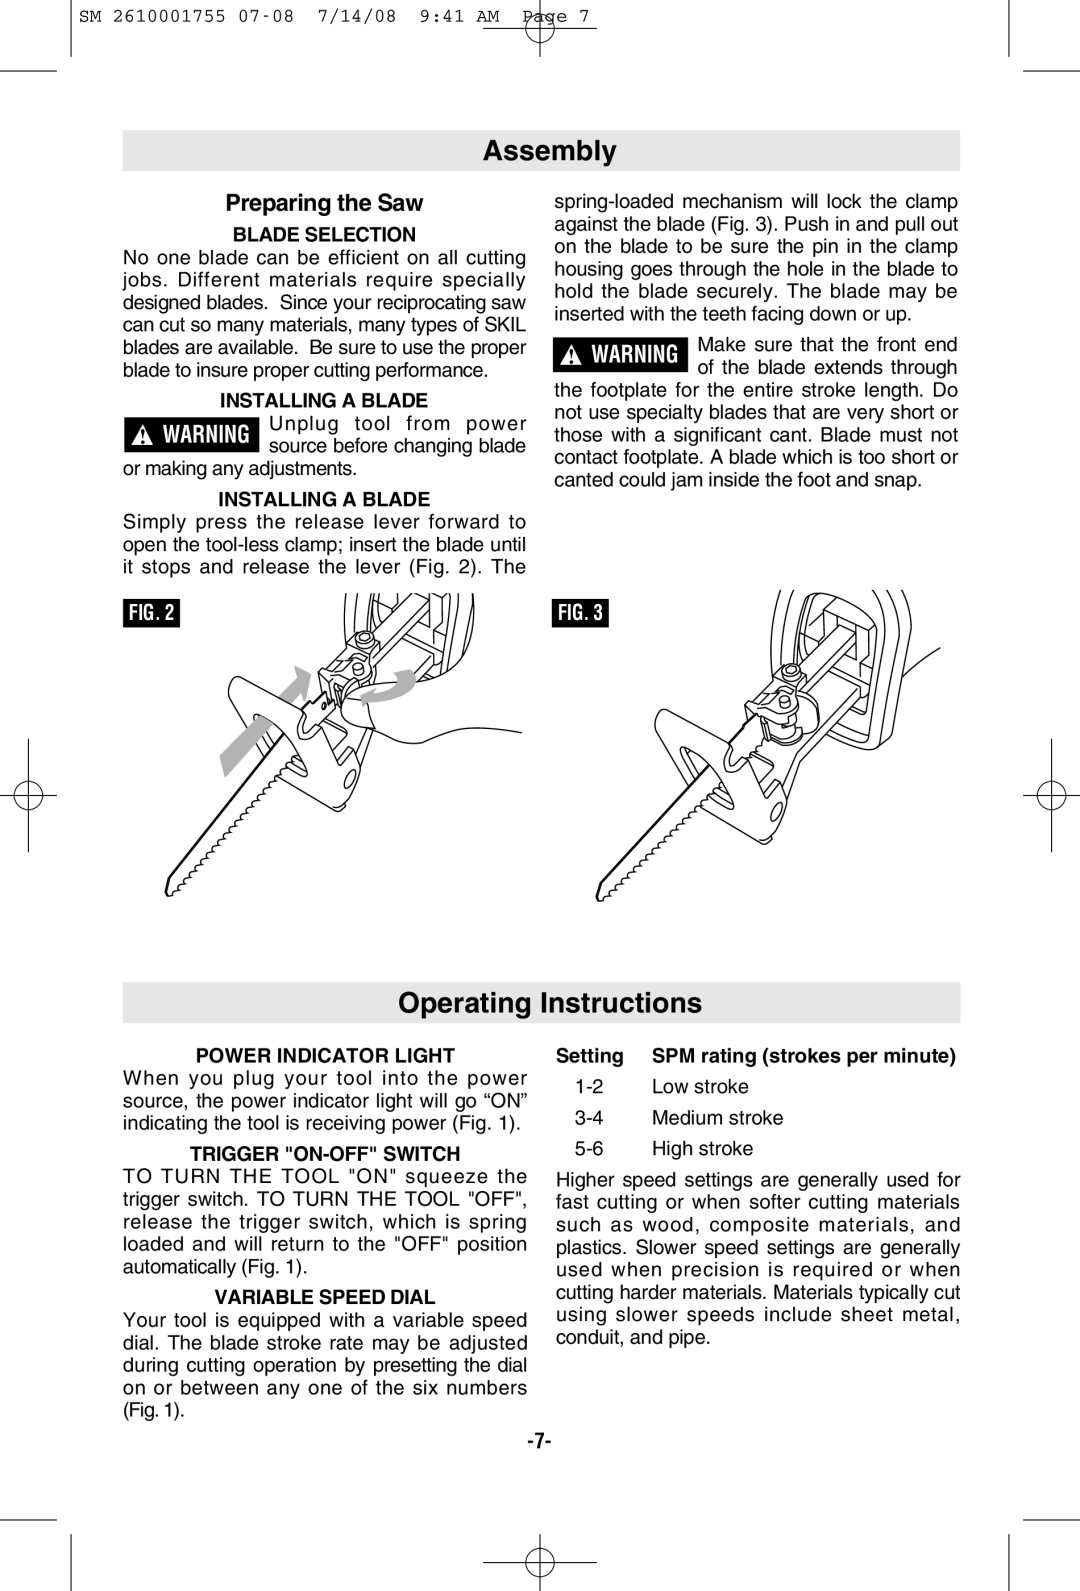 Skil 9215 manual Assembly, Operating Instructions, Preparing the Saw 